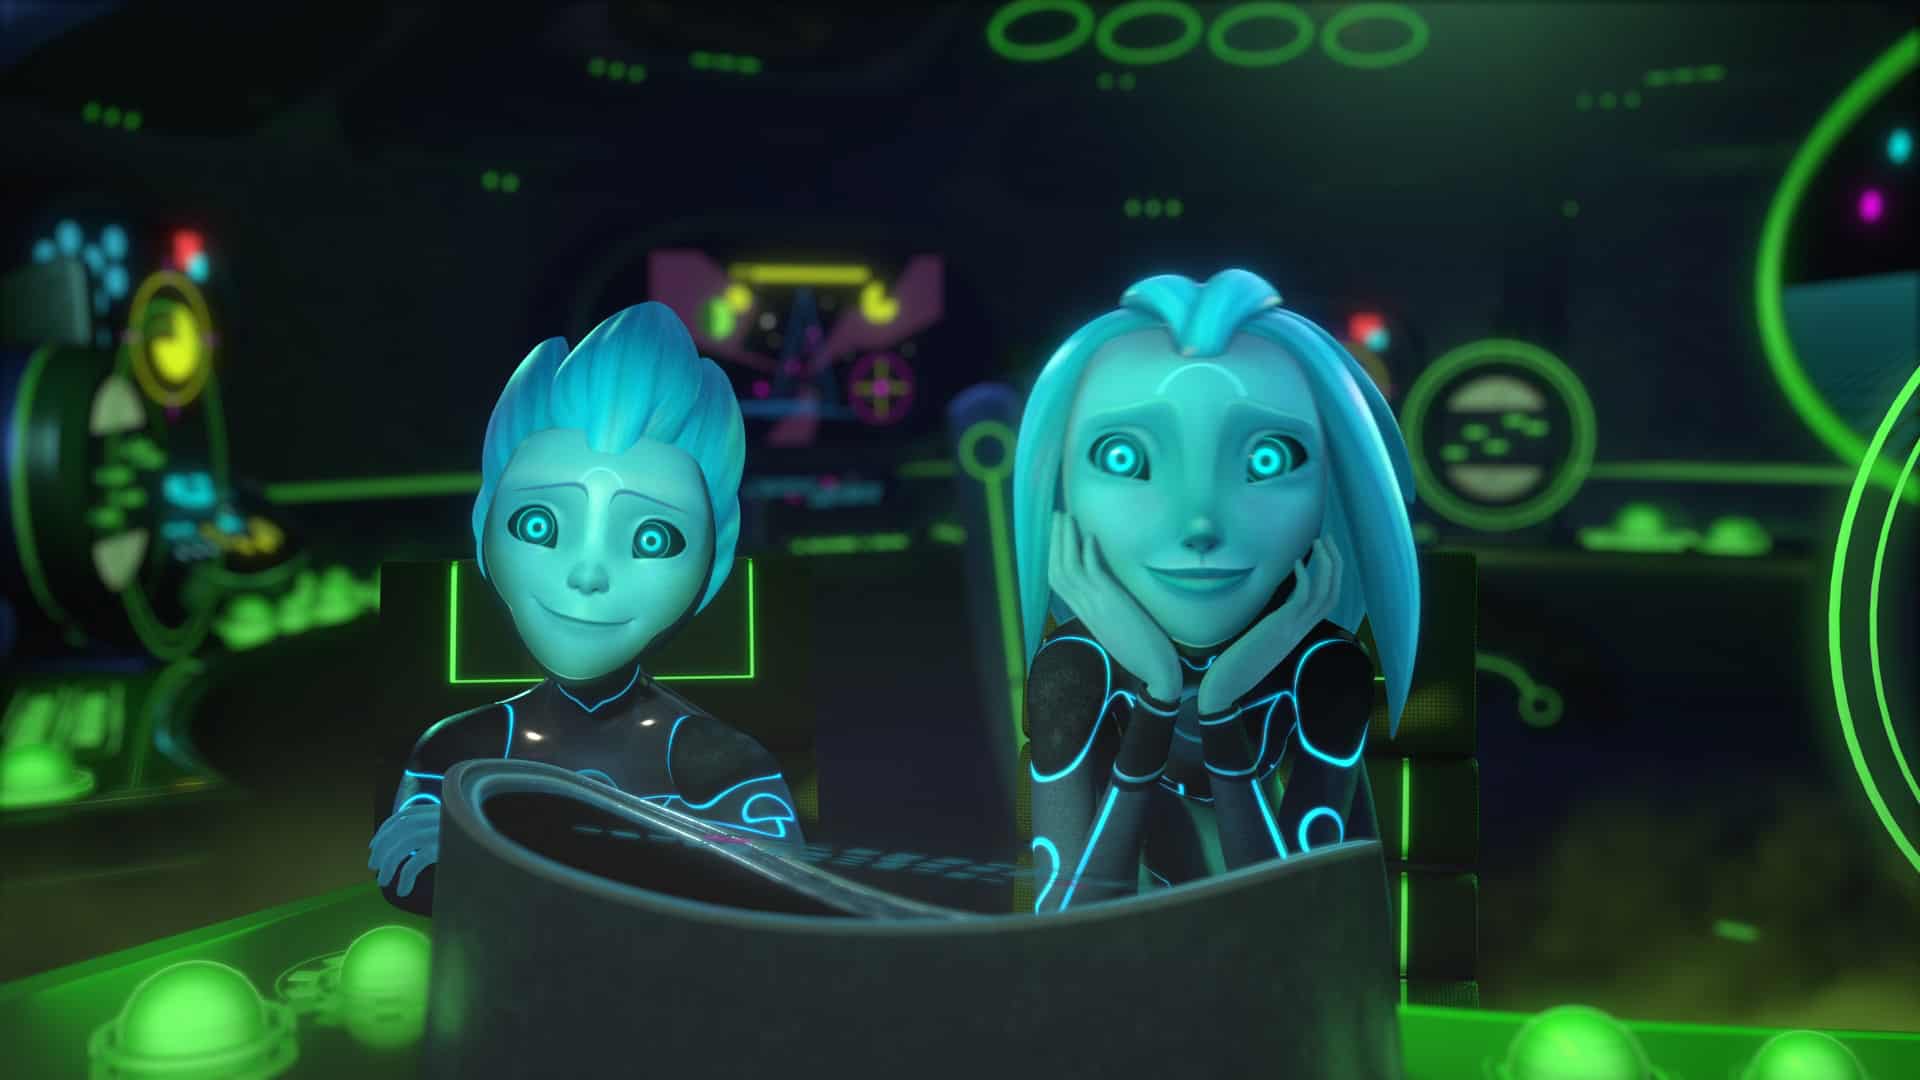 New Clips from Season 2 of DreamWorks 3Below: Tales of Arcadia